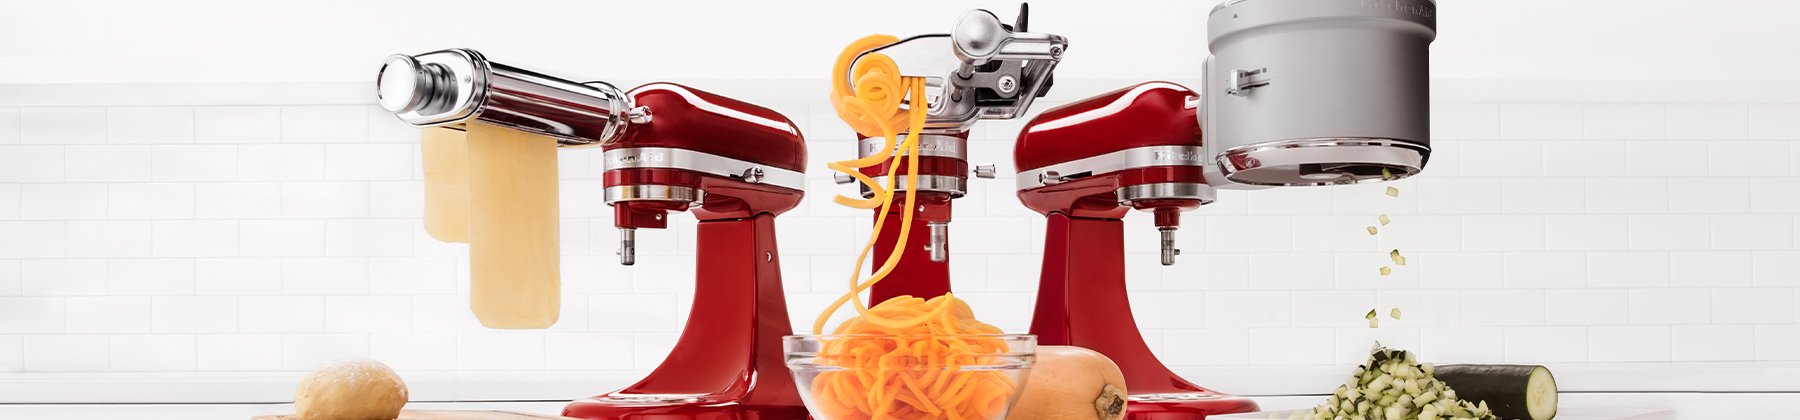 Photo of KitchenAid mixers and attachments.